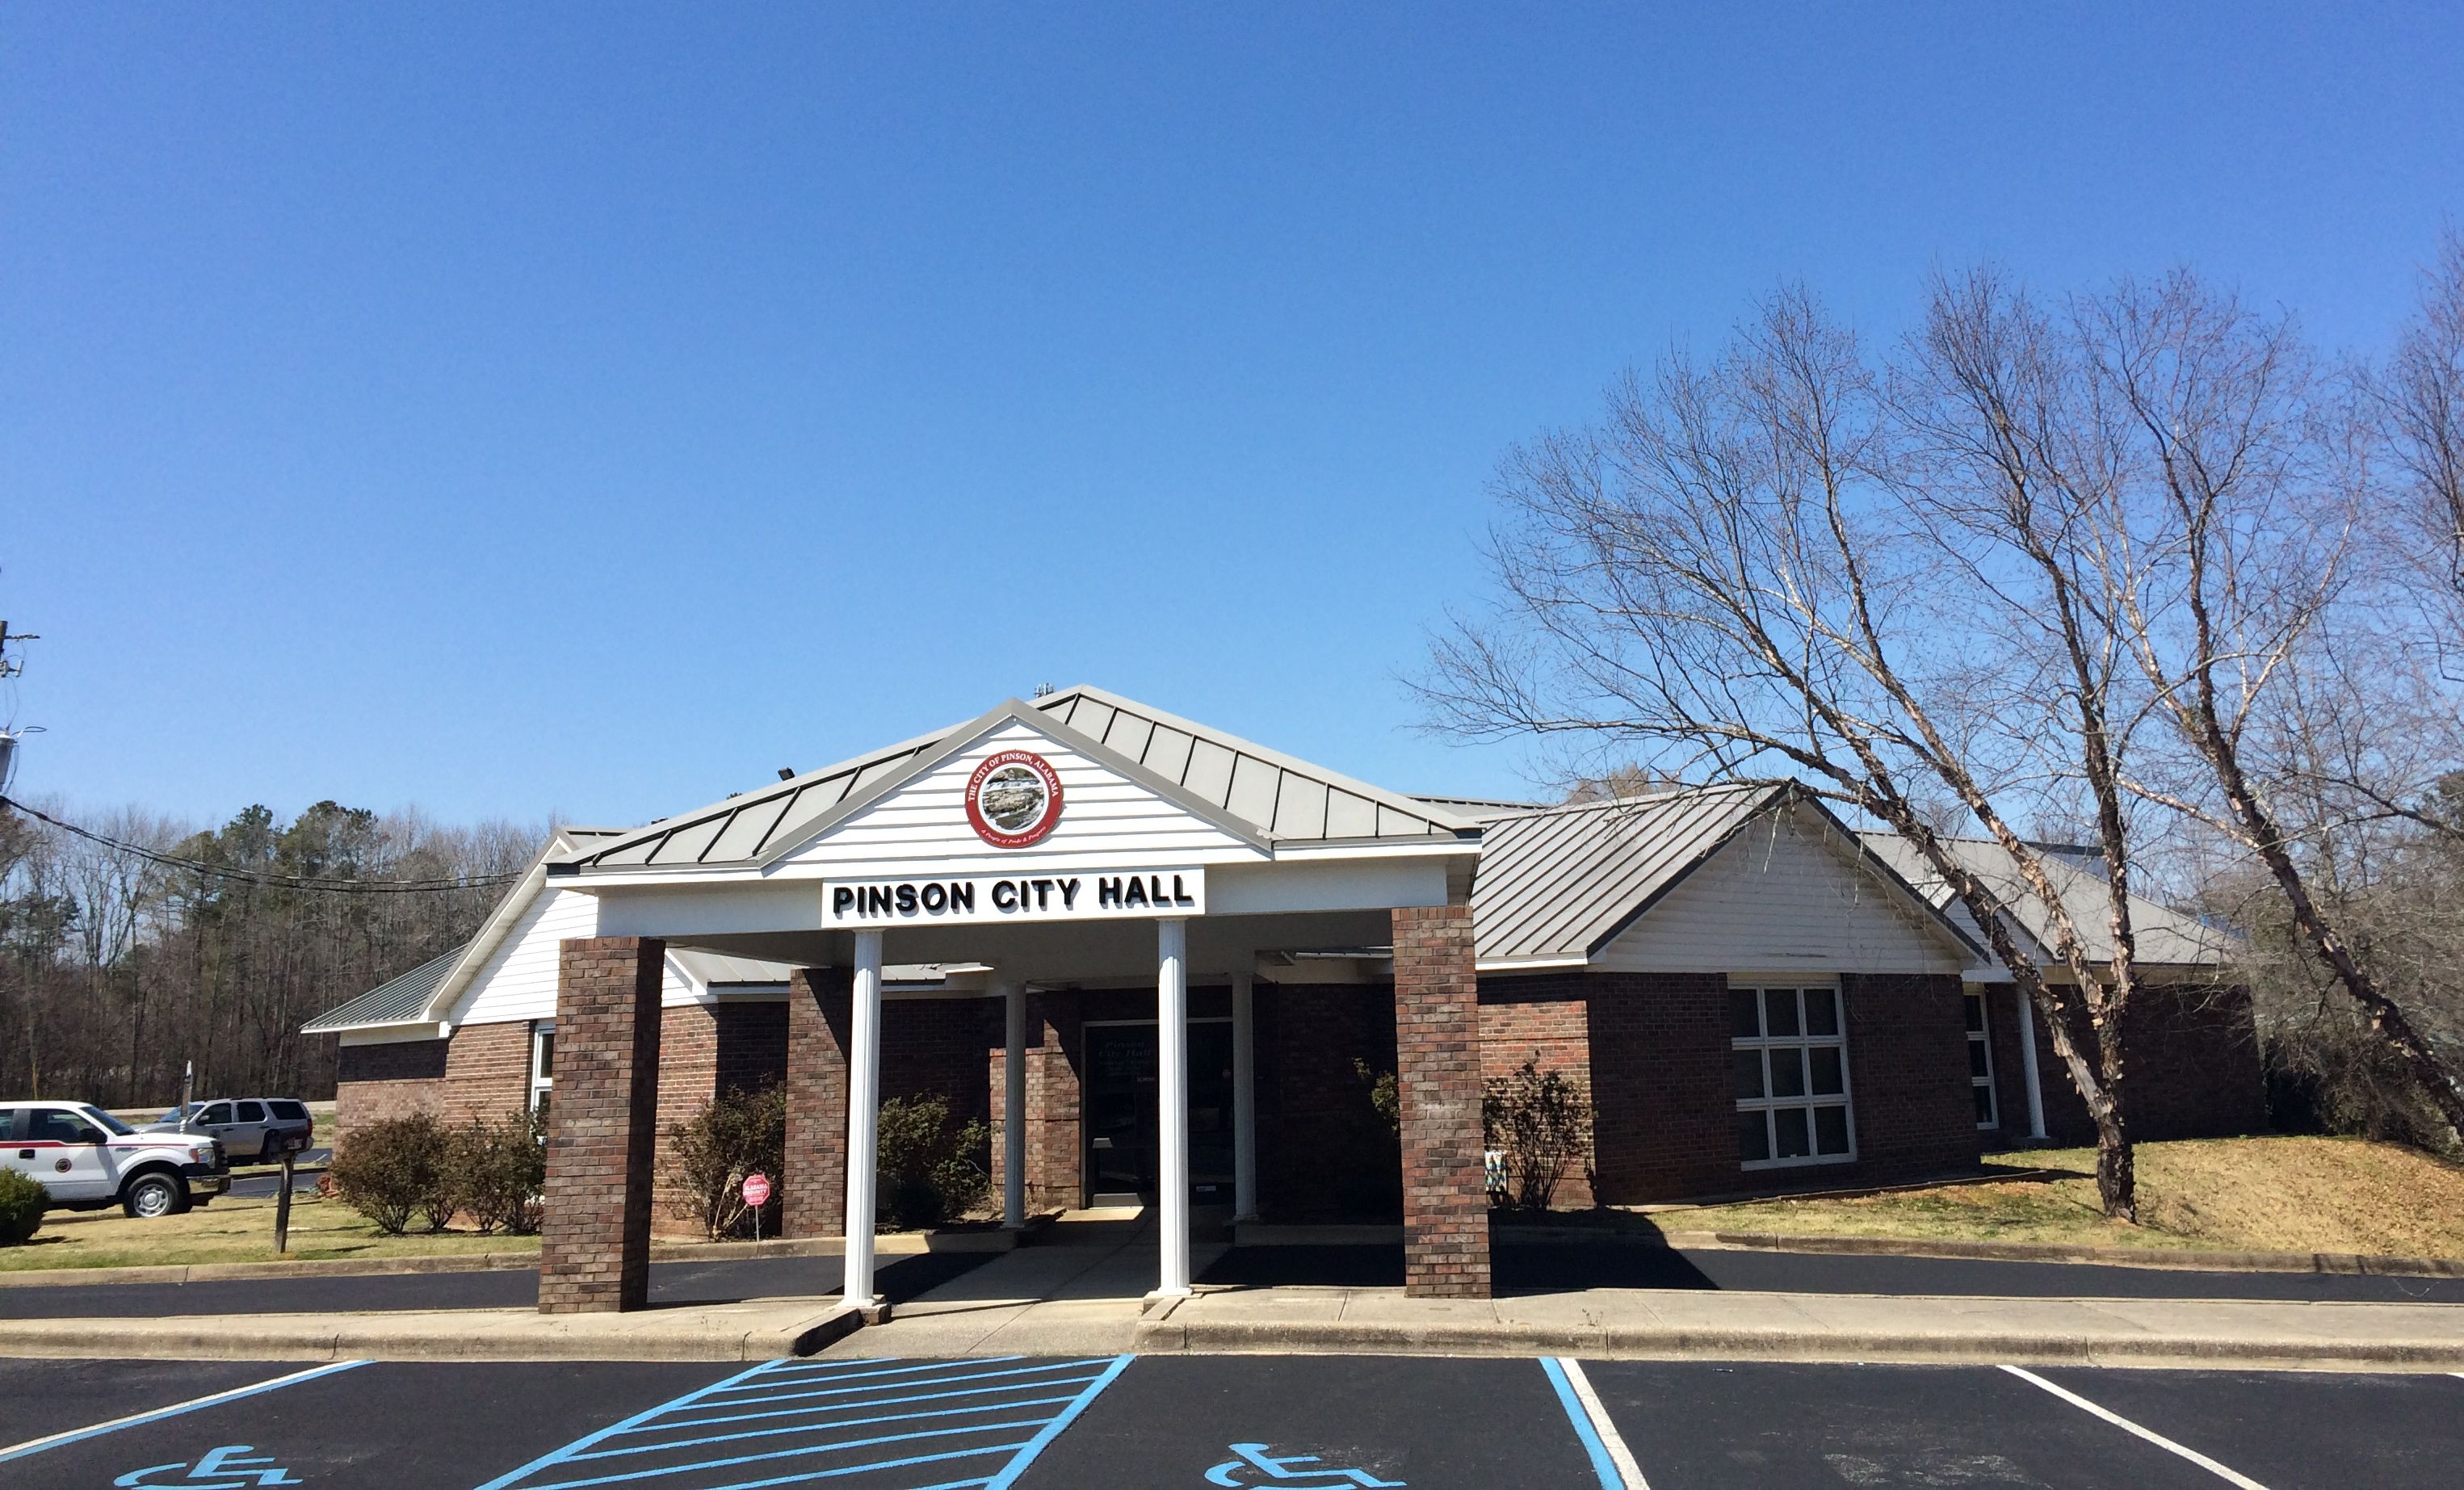 Trussville Council discusses proposed property code alterations